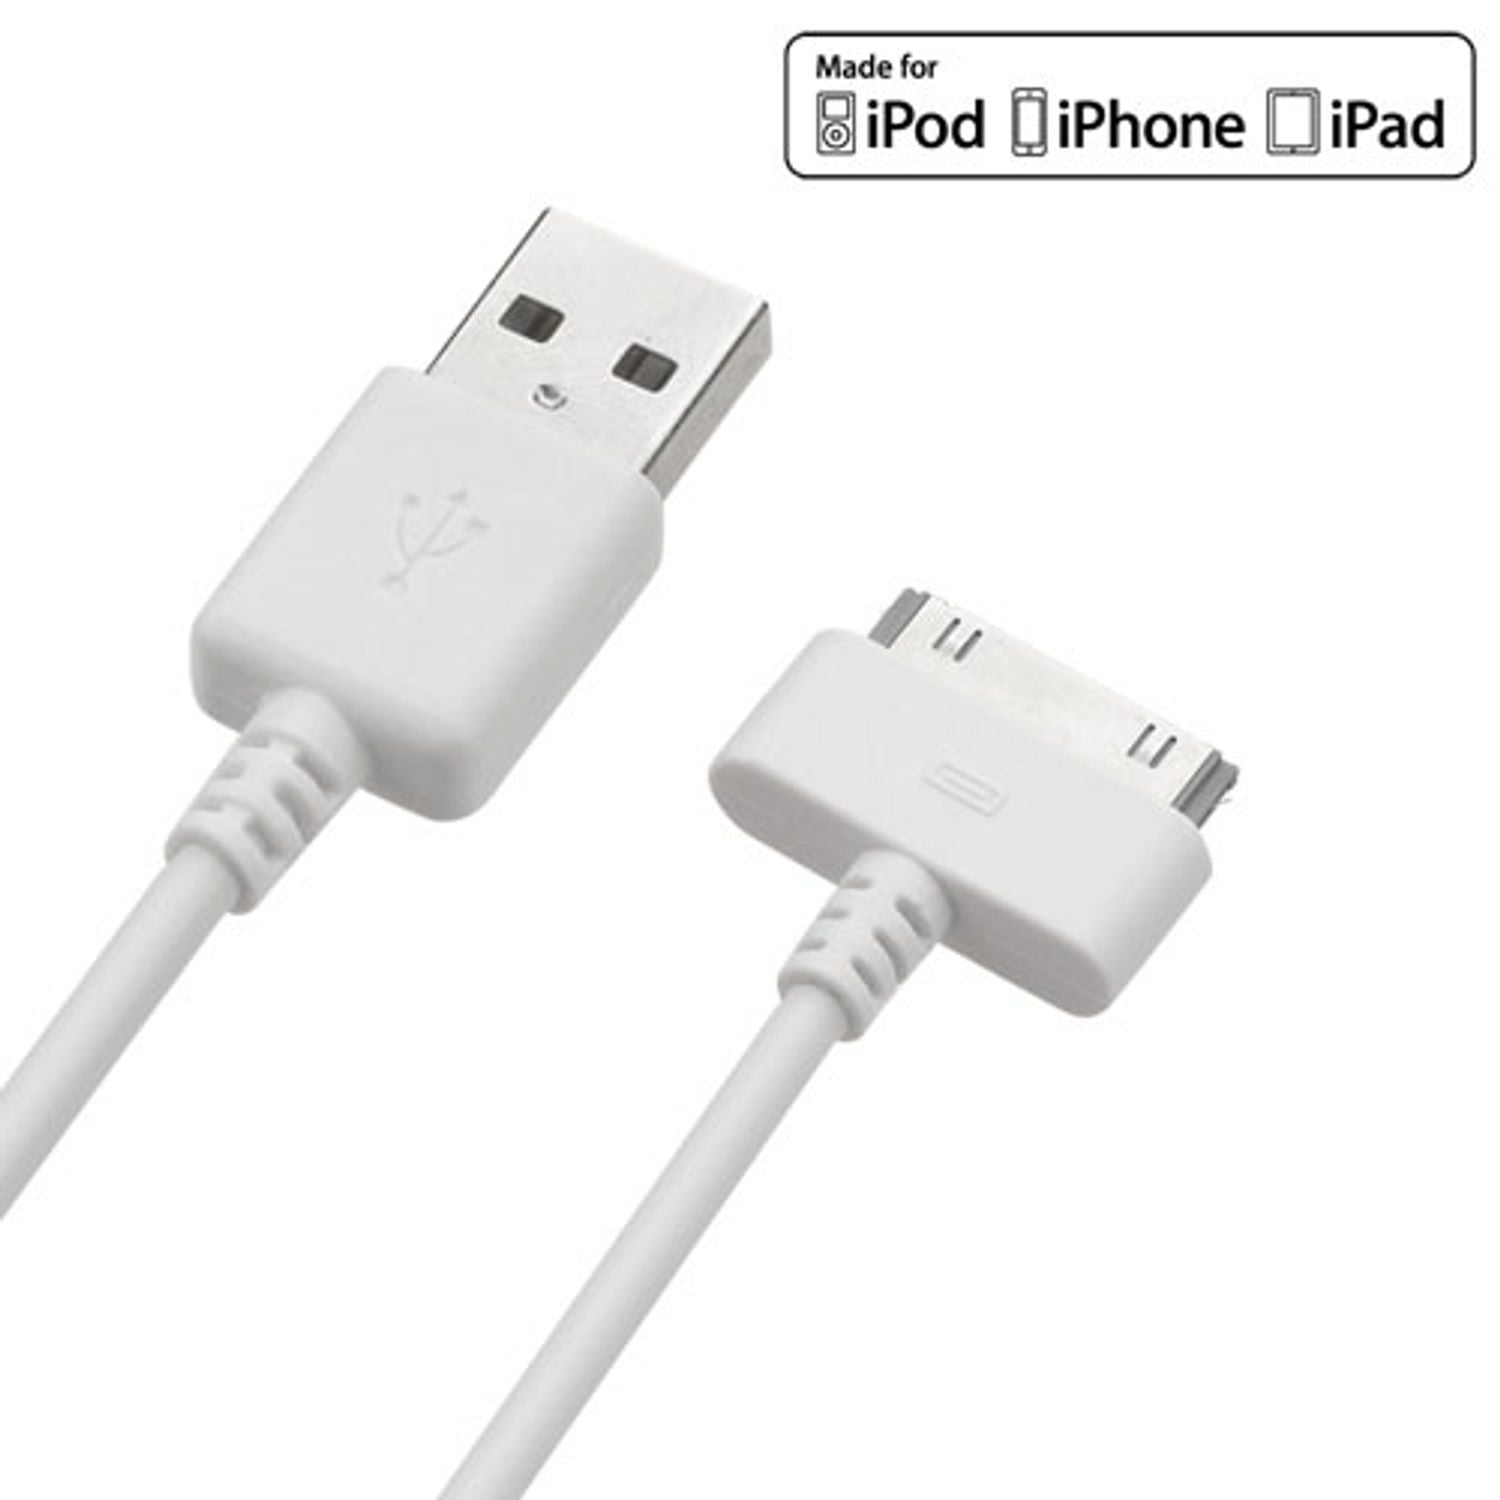 2X 10FT 30-PIN USB SYNC POWER CHARGER PURPLE CABLE CONNECTOR IPHONE 4S IPOD IPAD 